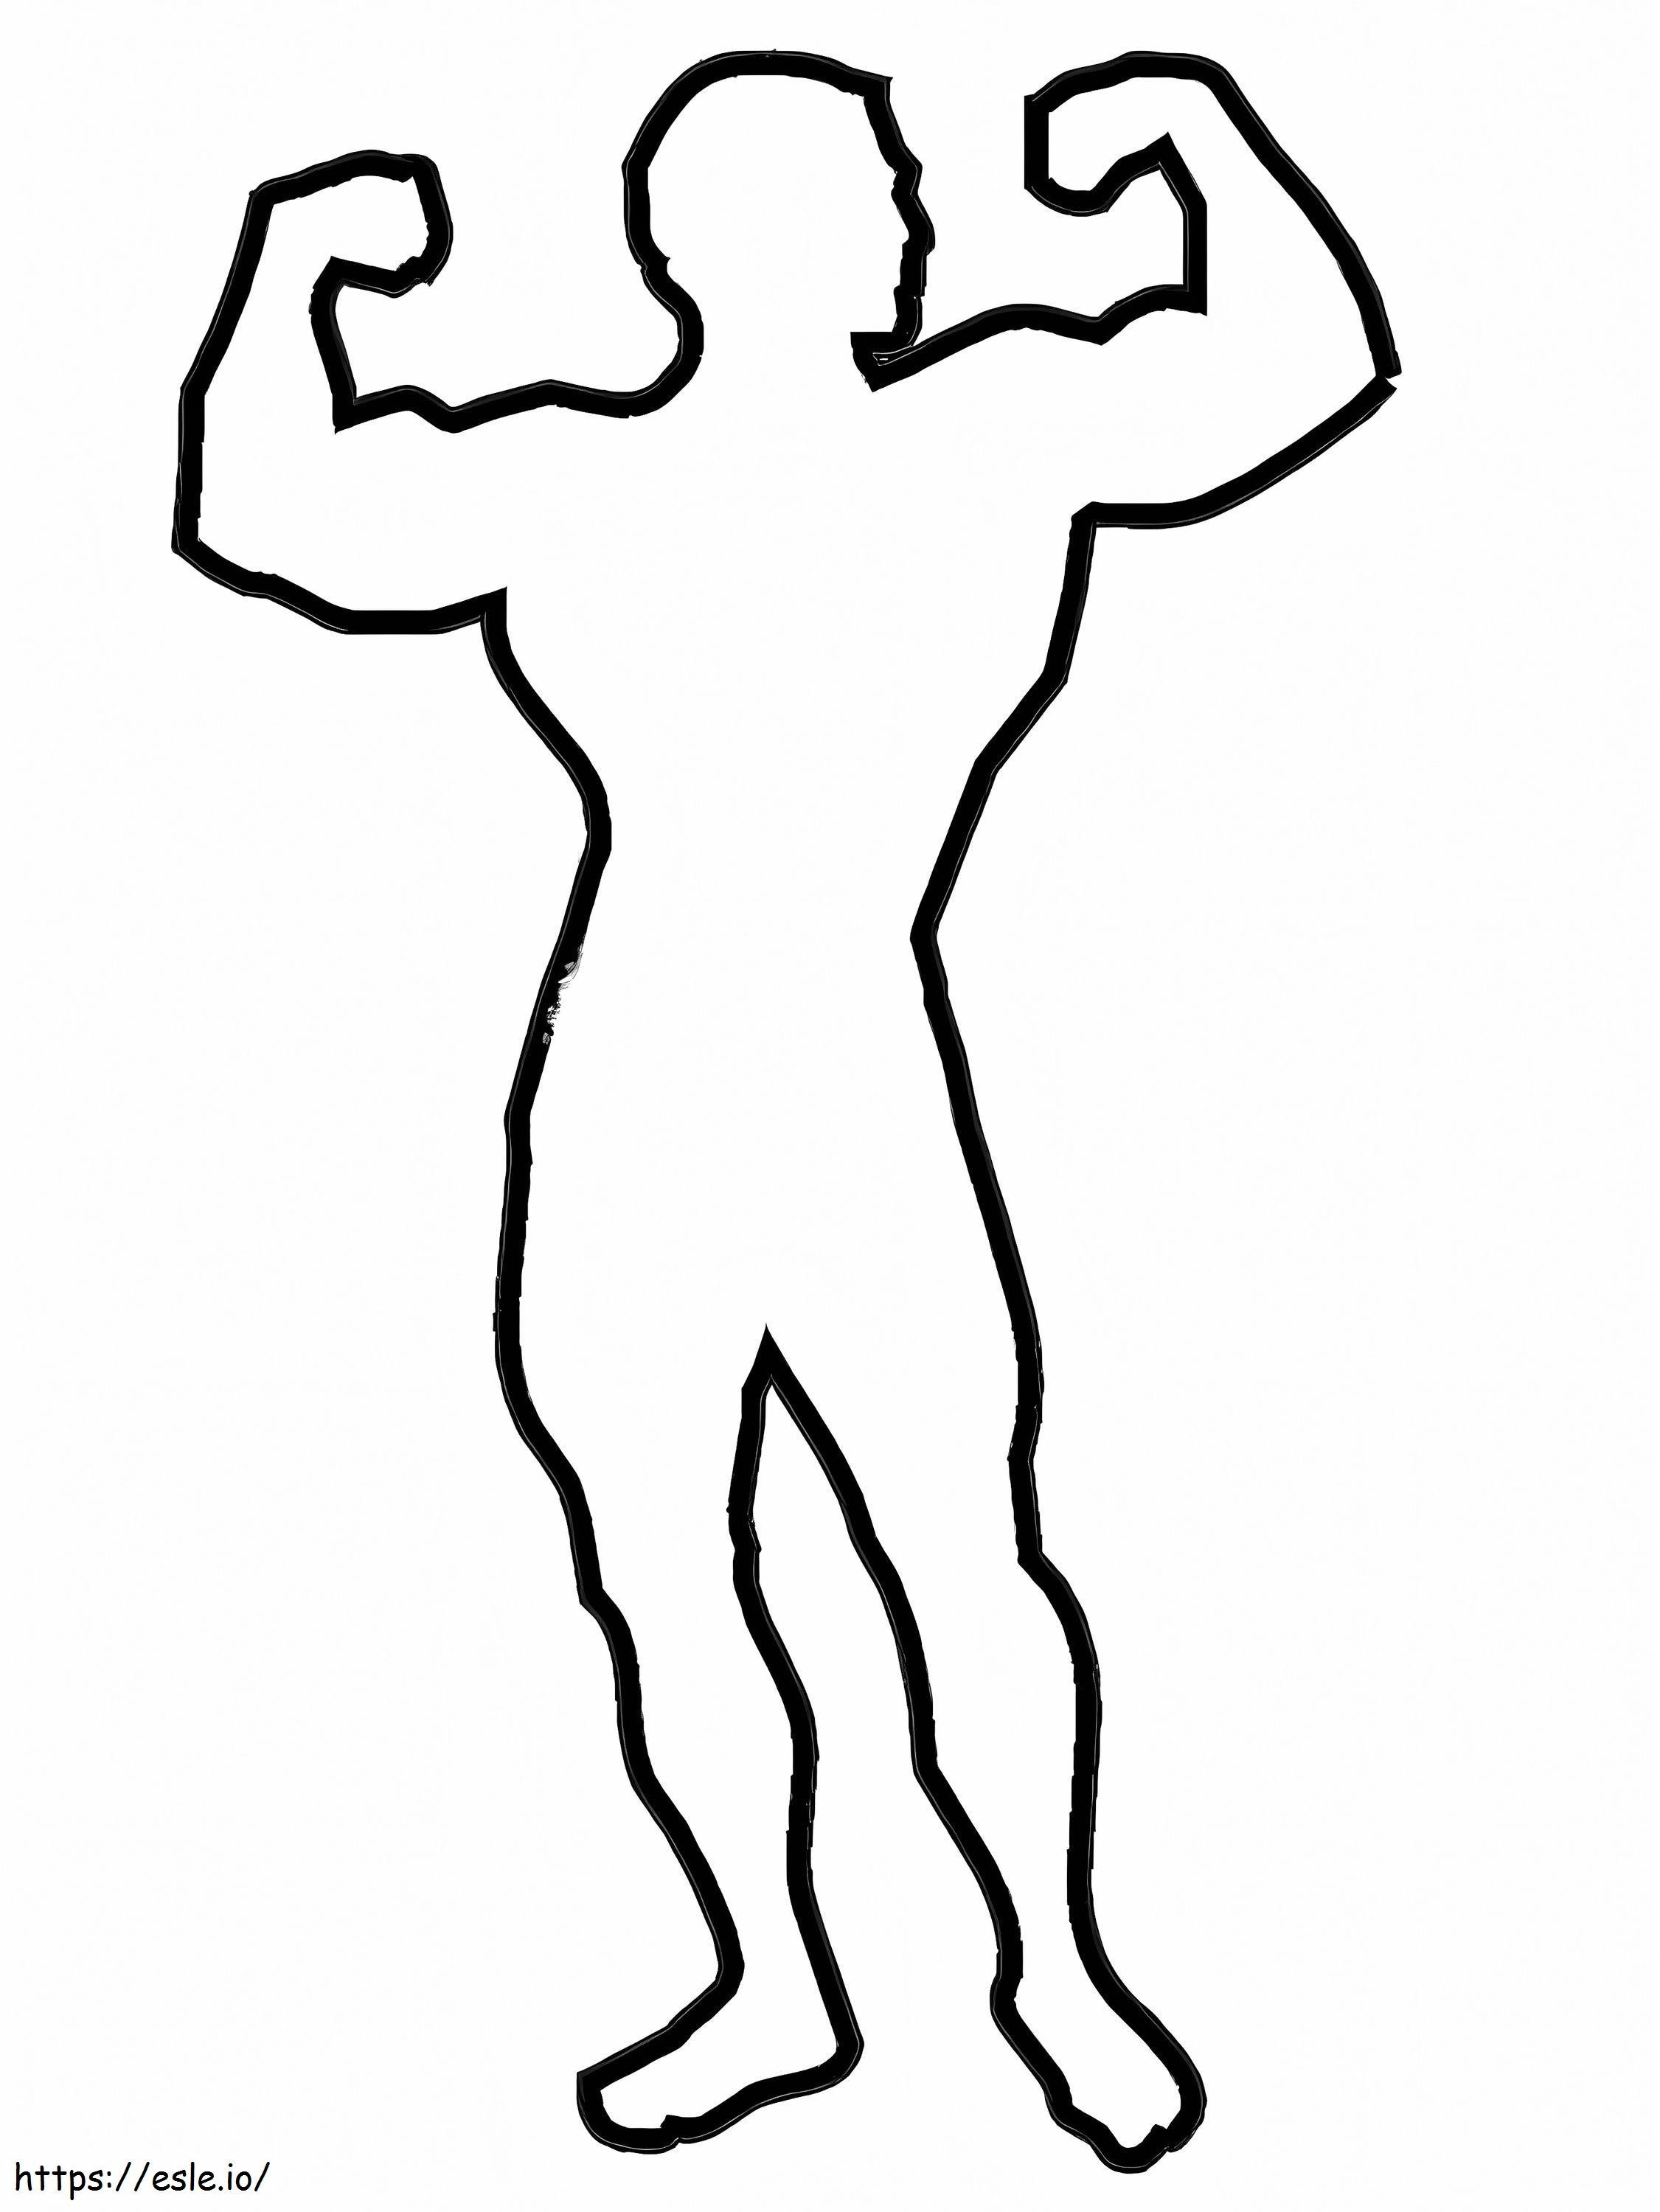 Cool Strong Person Outline coloring page